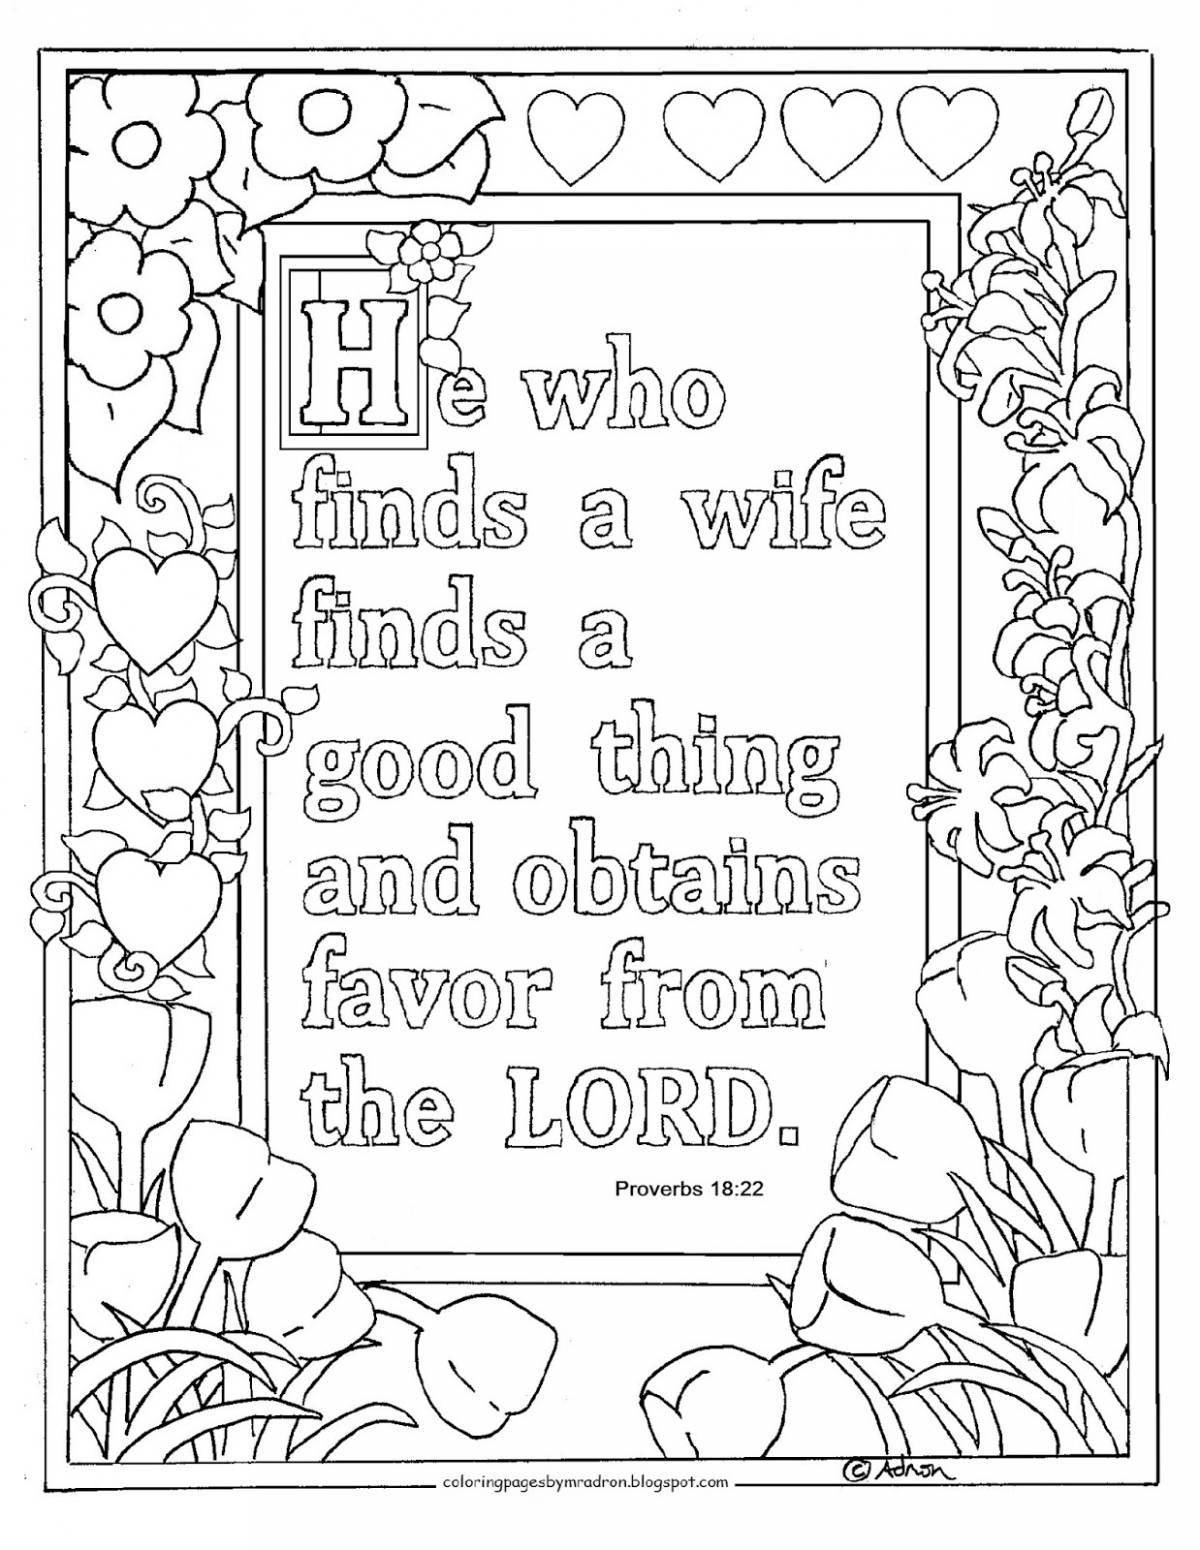 Coloring book inspirational proverbs